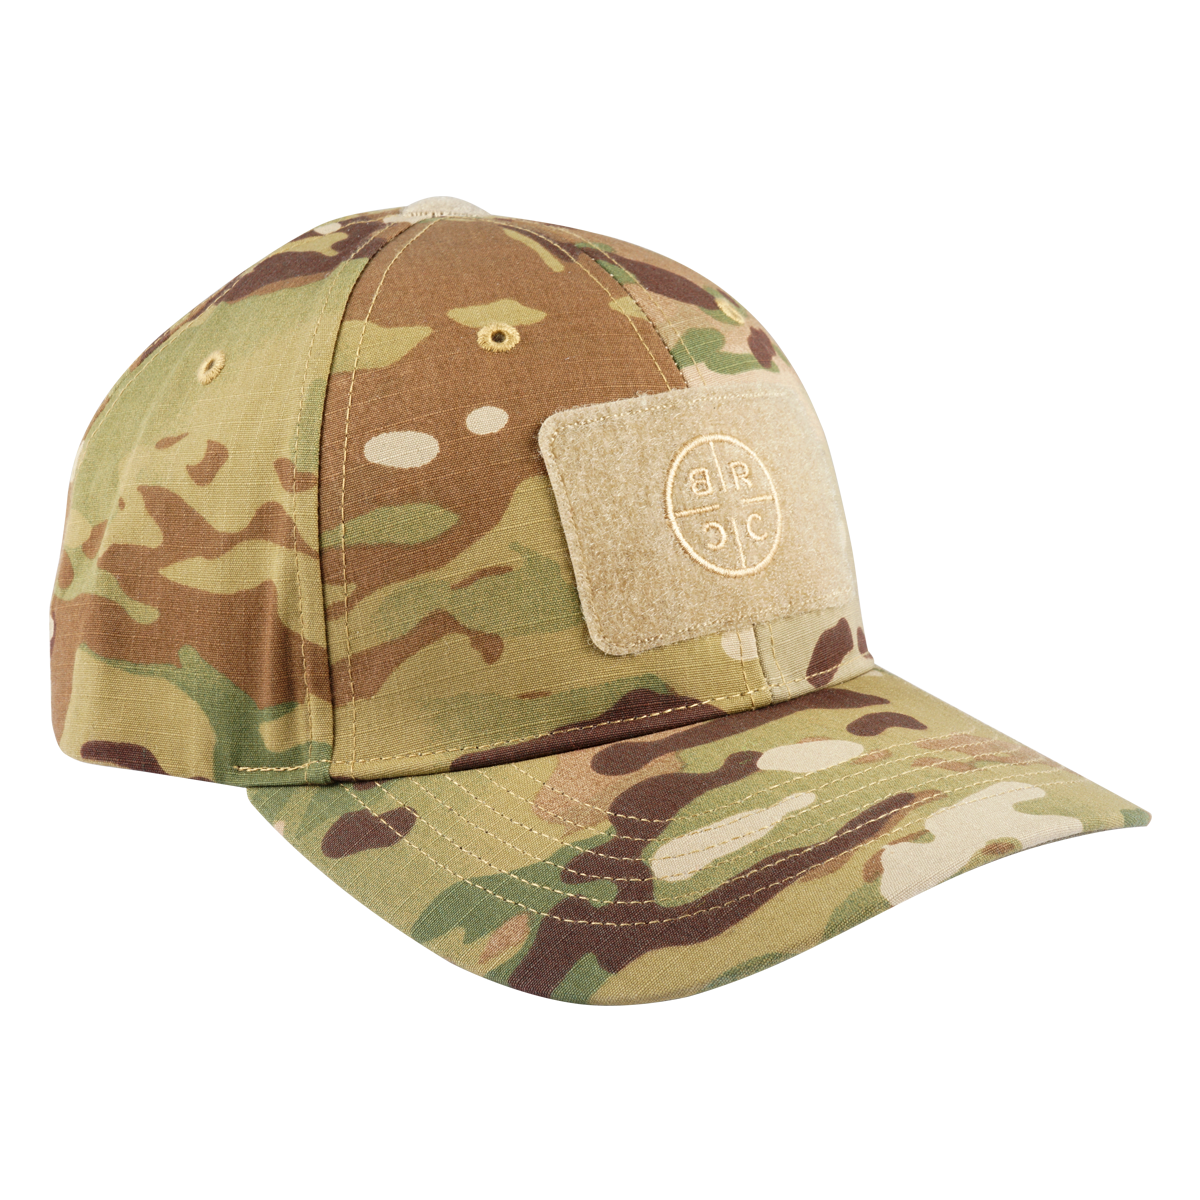 Velcro Patch - One Hat with Various Styles